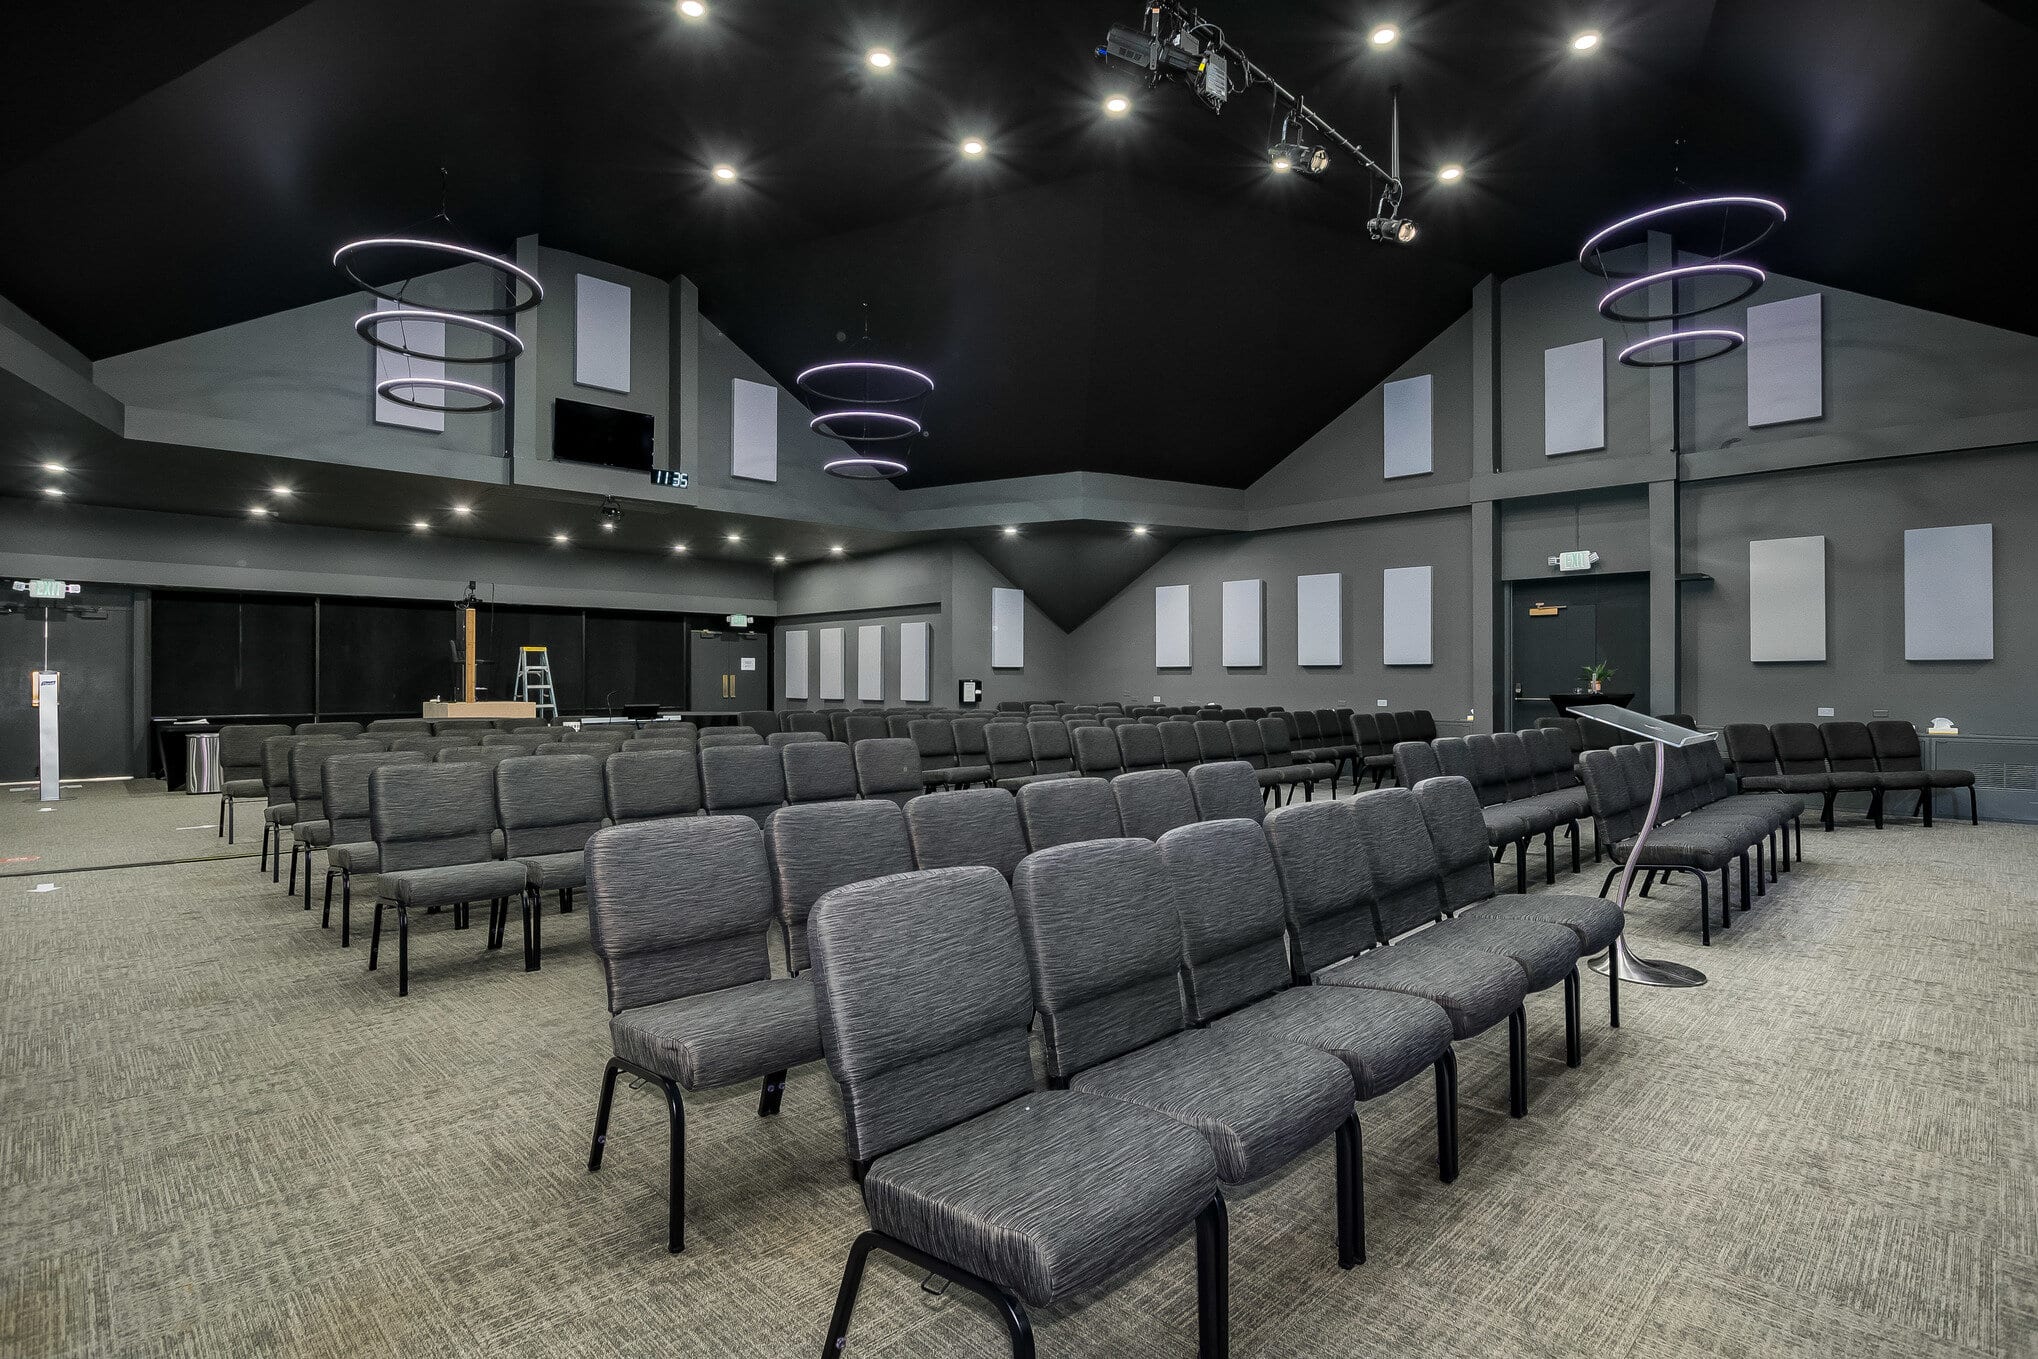 Seating in an auditorium with colorful lights and geometric decor